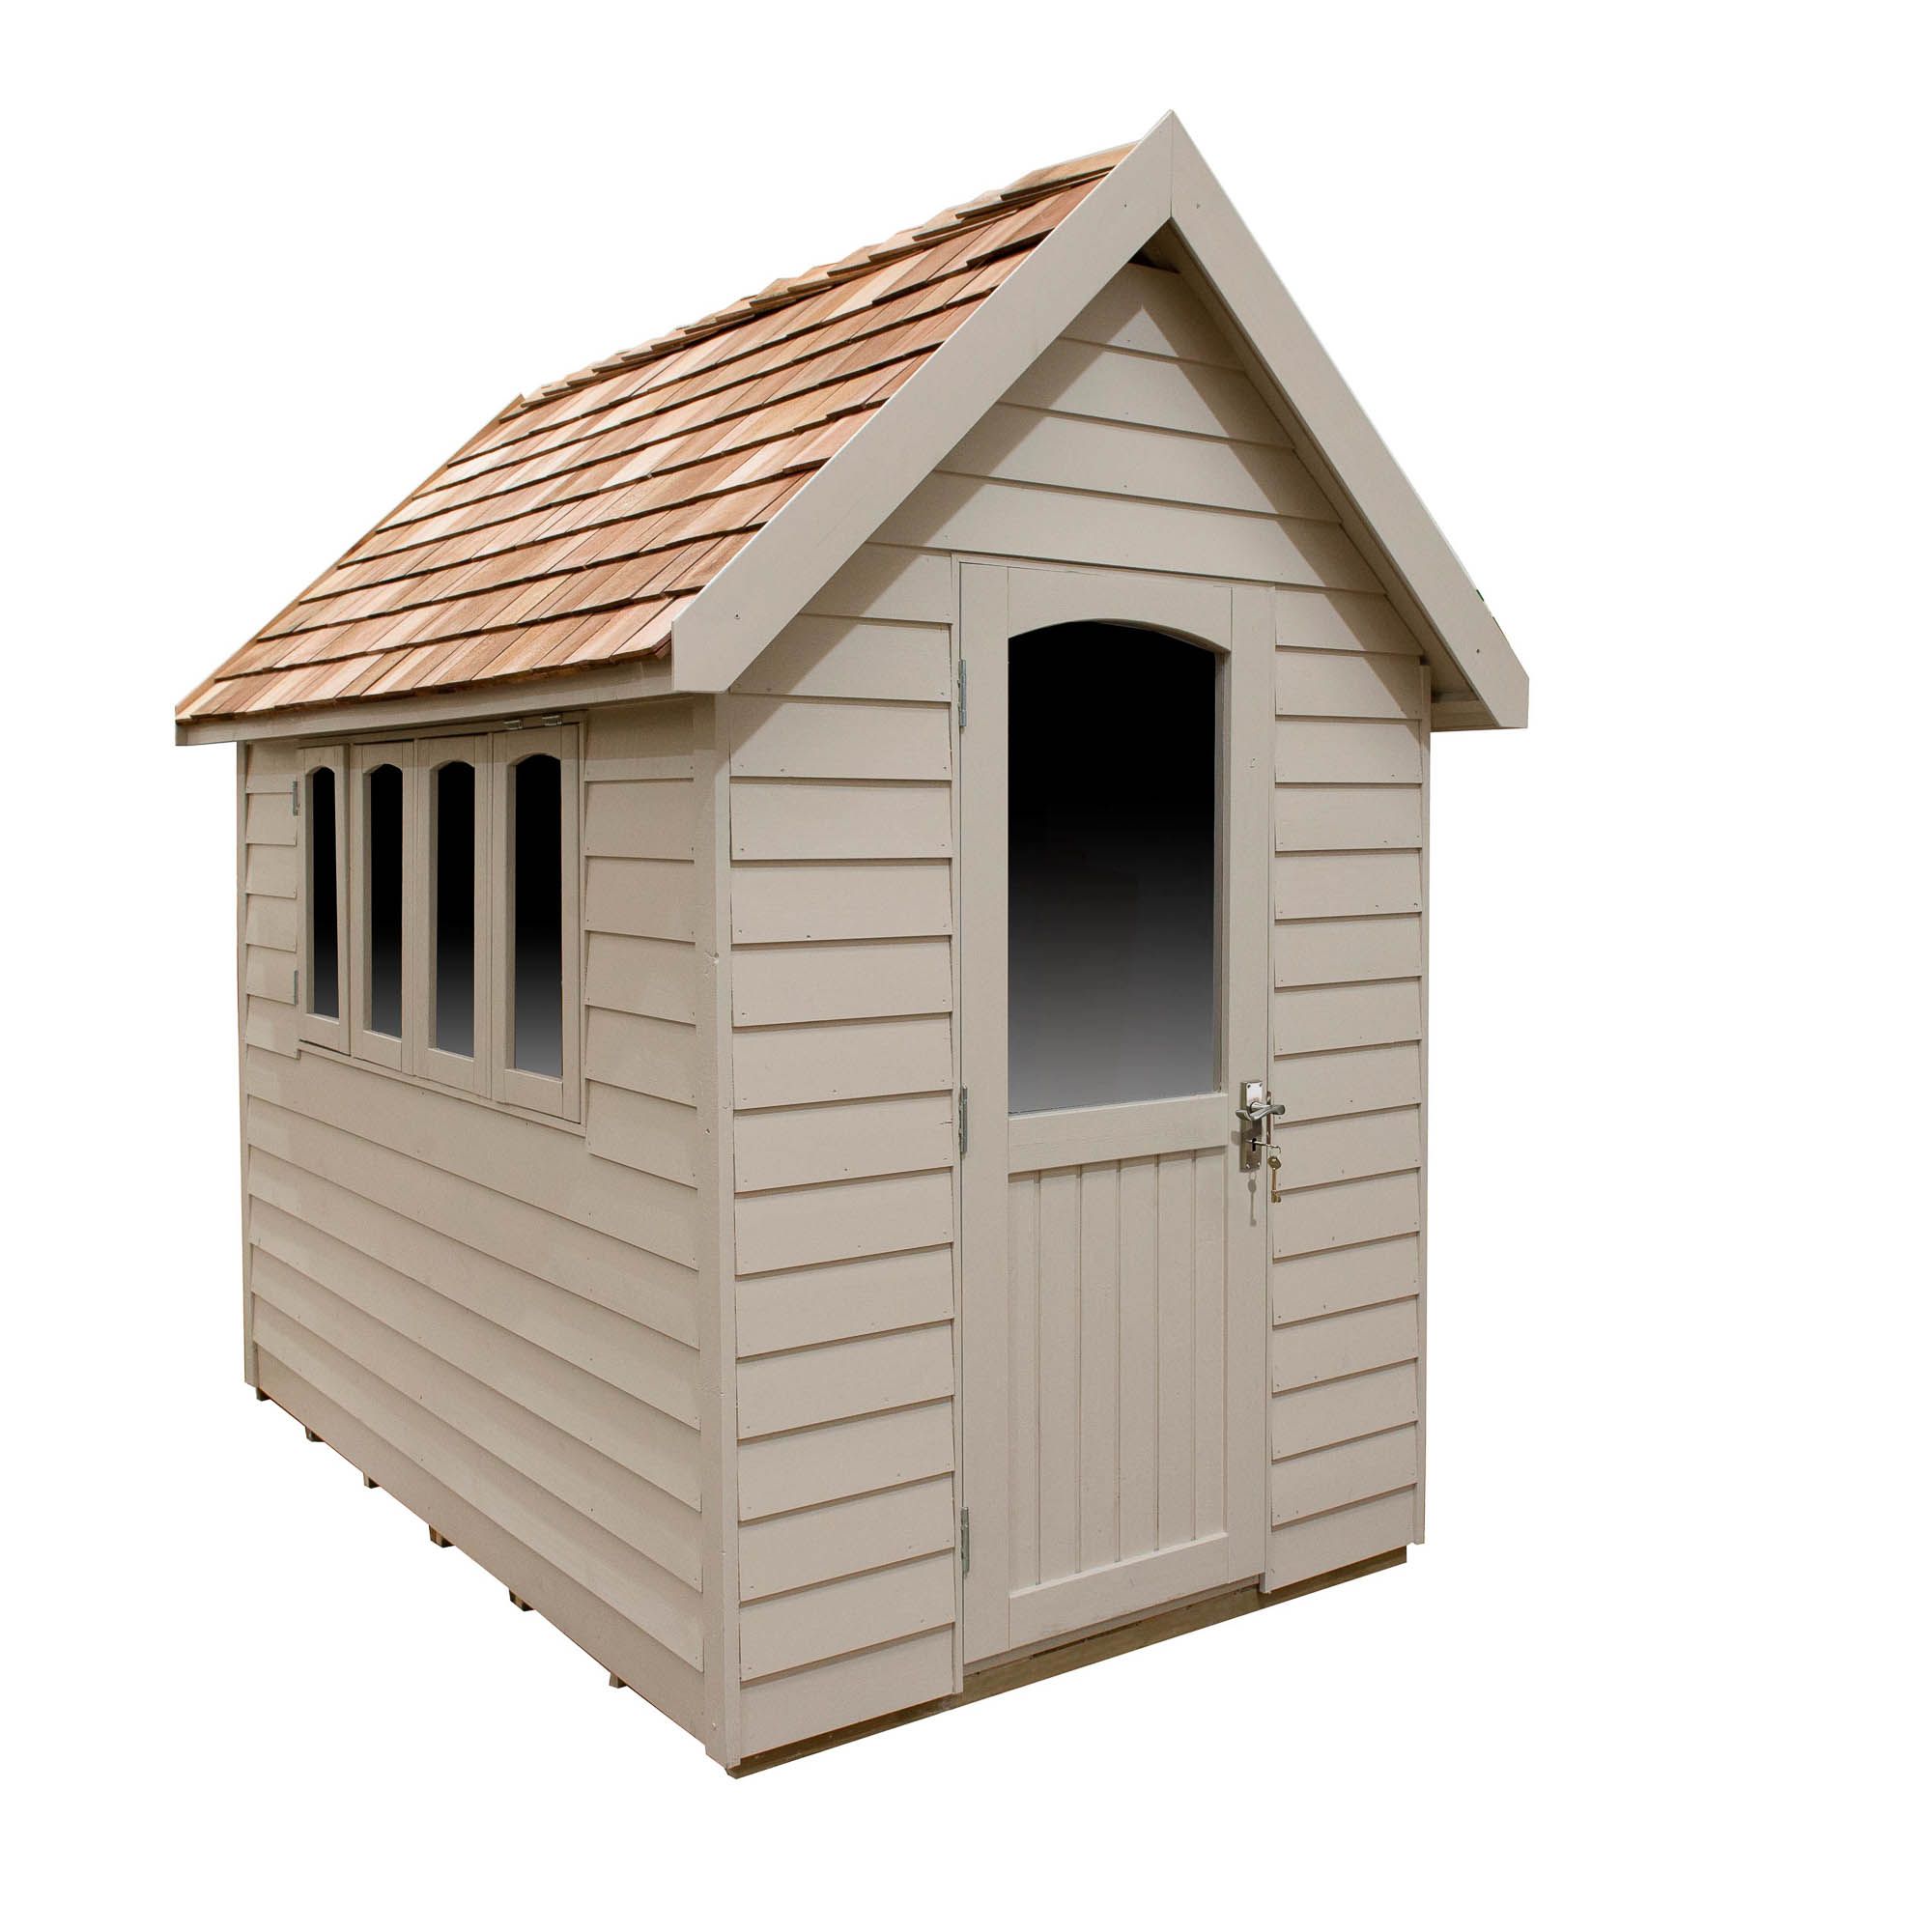 Forest Garden Retreat 8x5 ft Apex Cream Wooden Shed with floor & 2 windows - Assembly service included